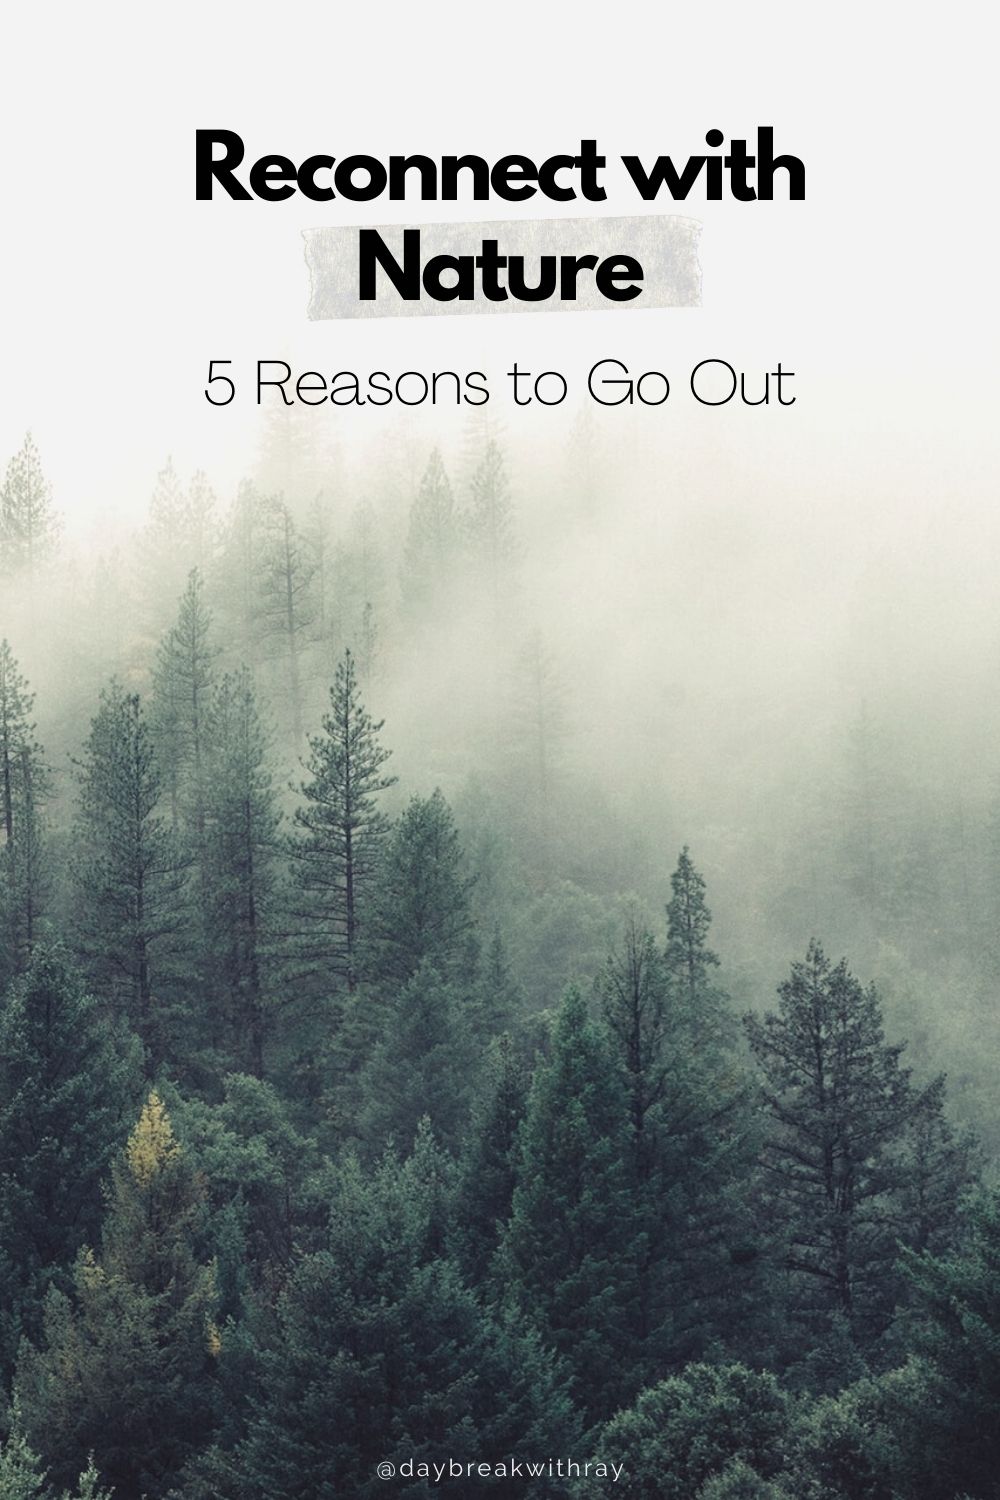 5 Reasons to Go Out and Reconnect with Nature